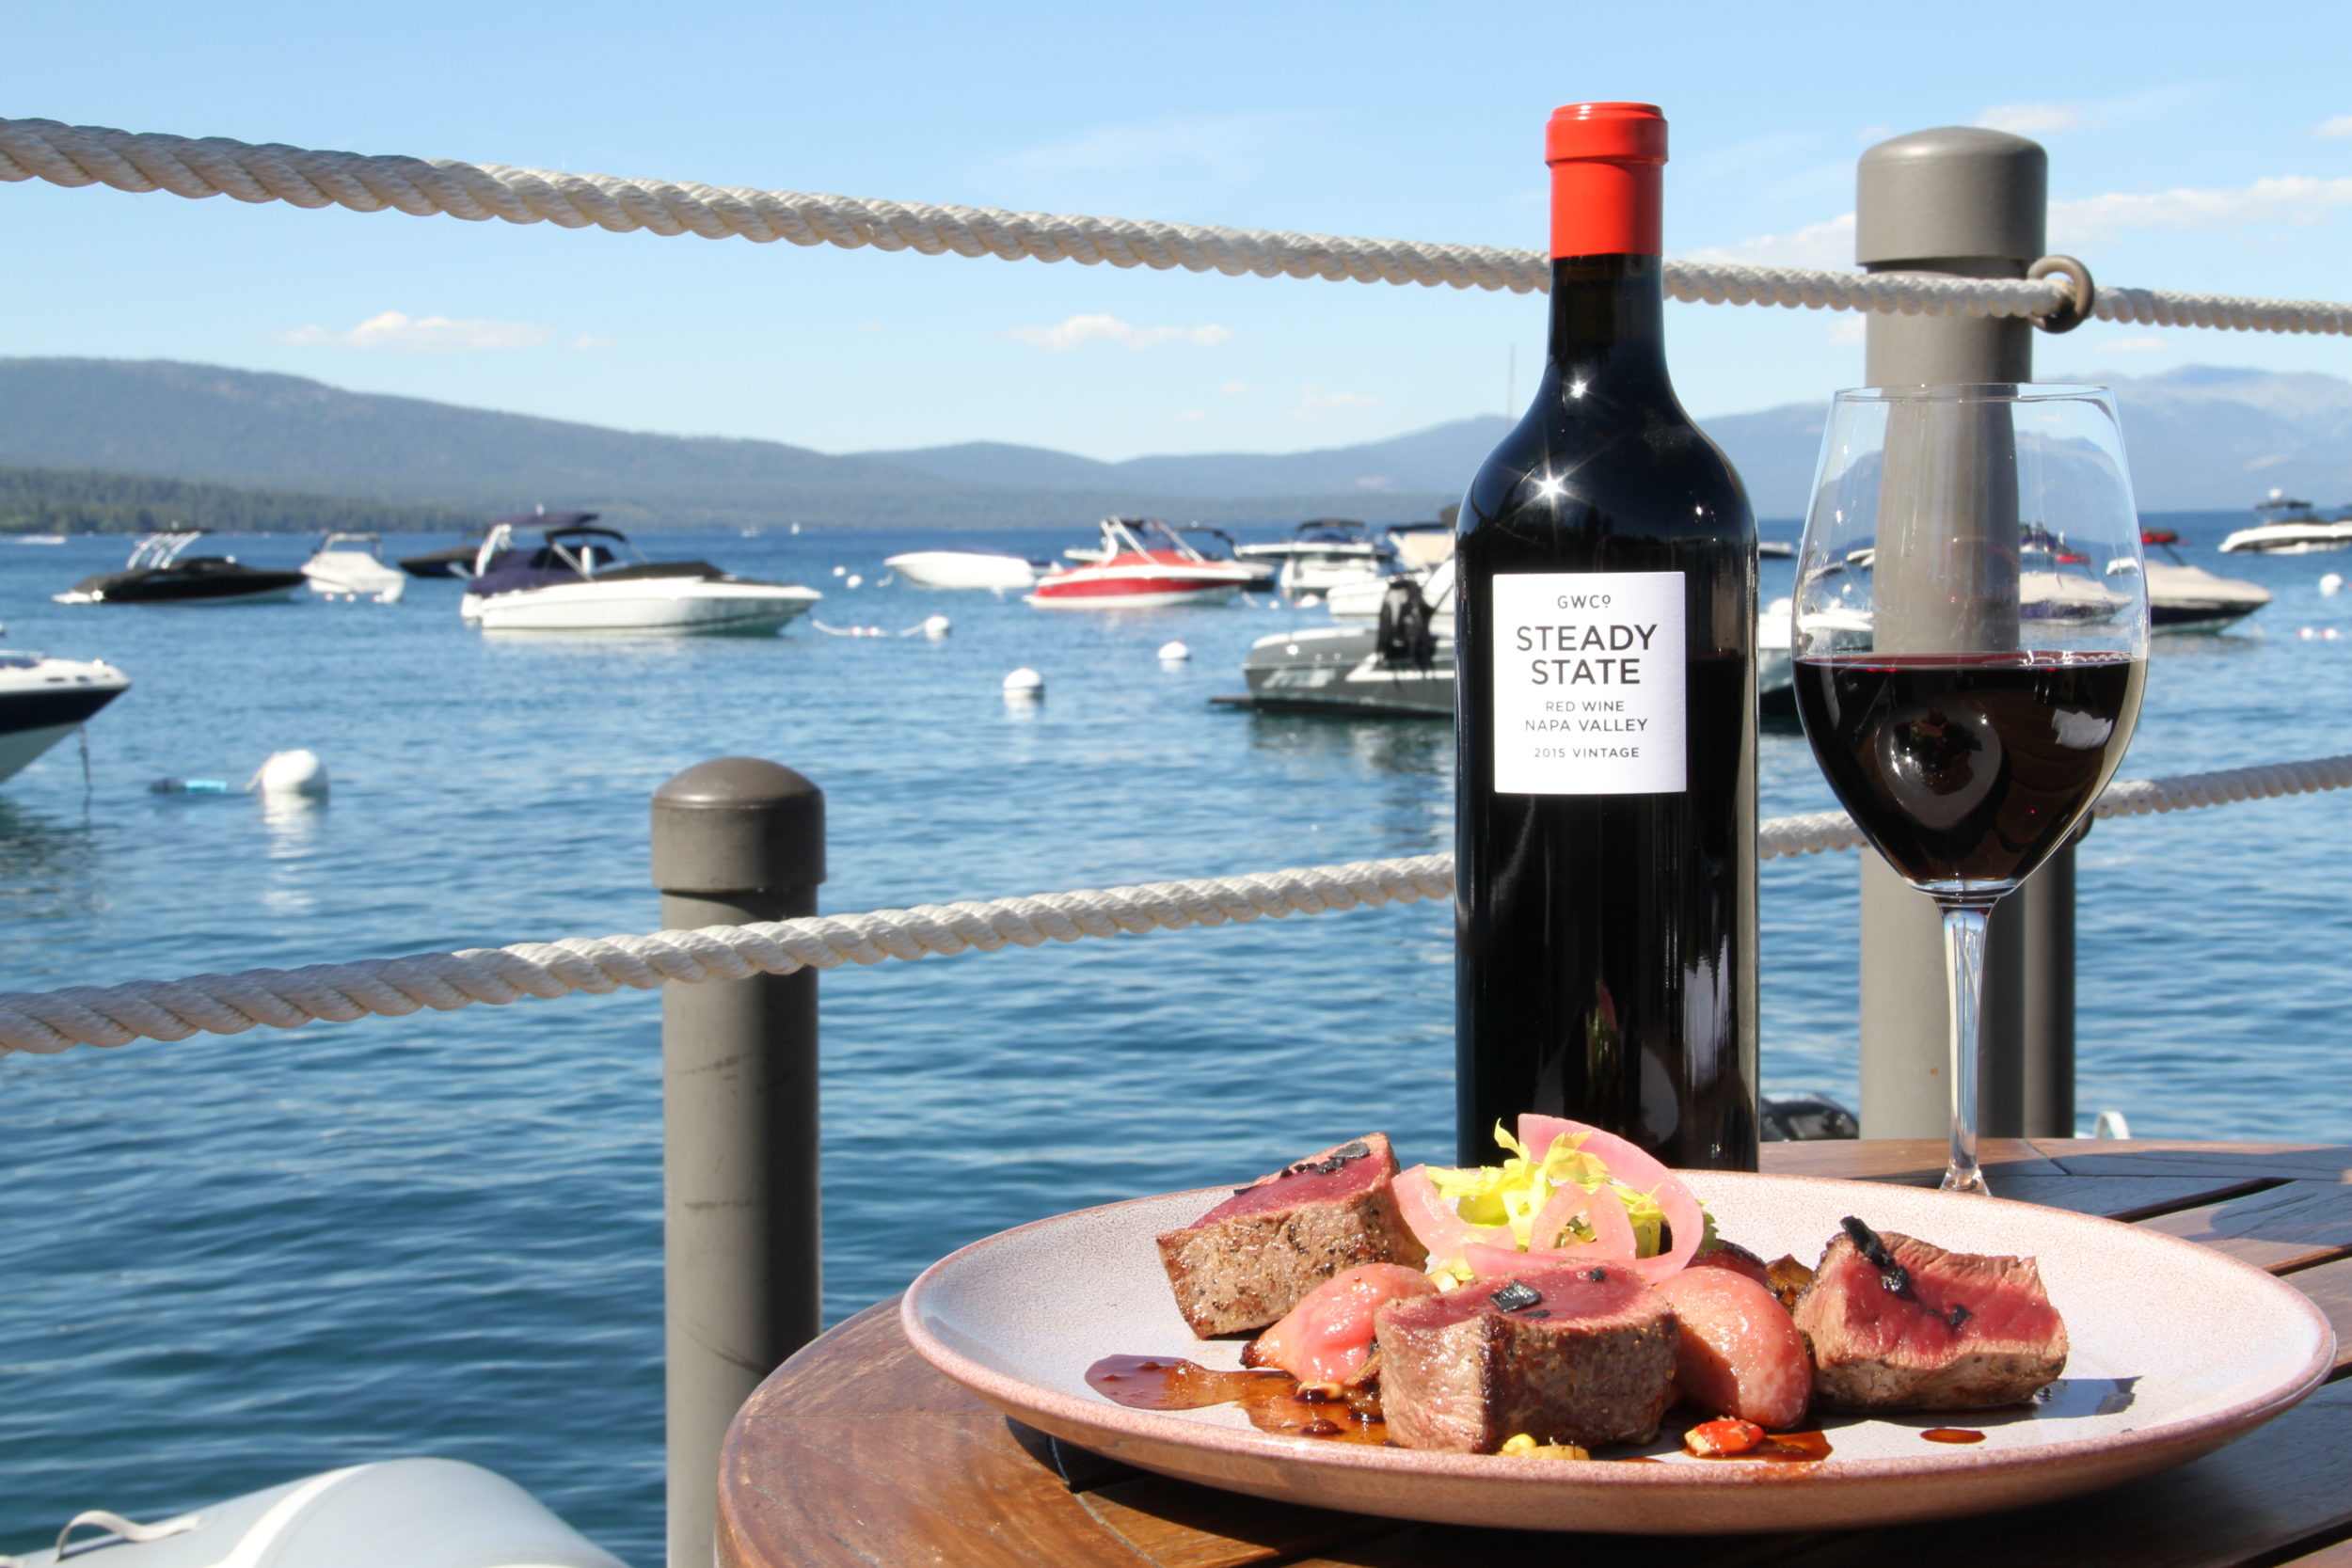 West Shore Cafe Dinner Special. Elk Tenderloin and Stead State Red Wine from Napa Valley. Lake Tahoe in the background.